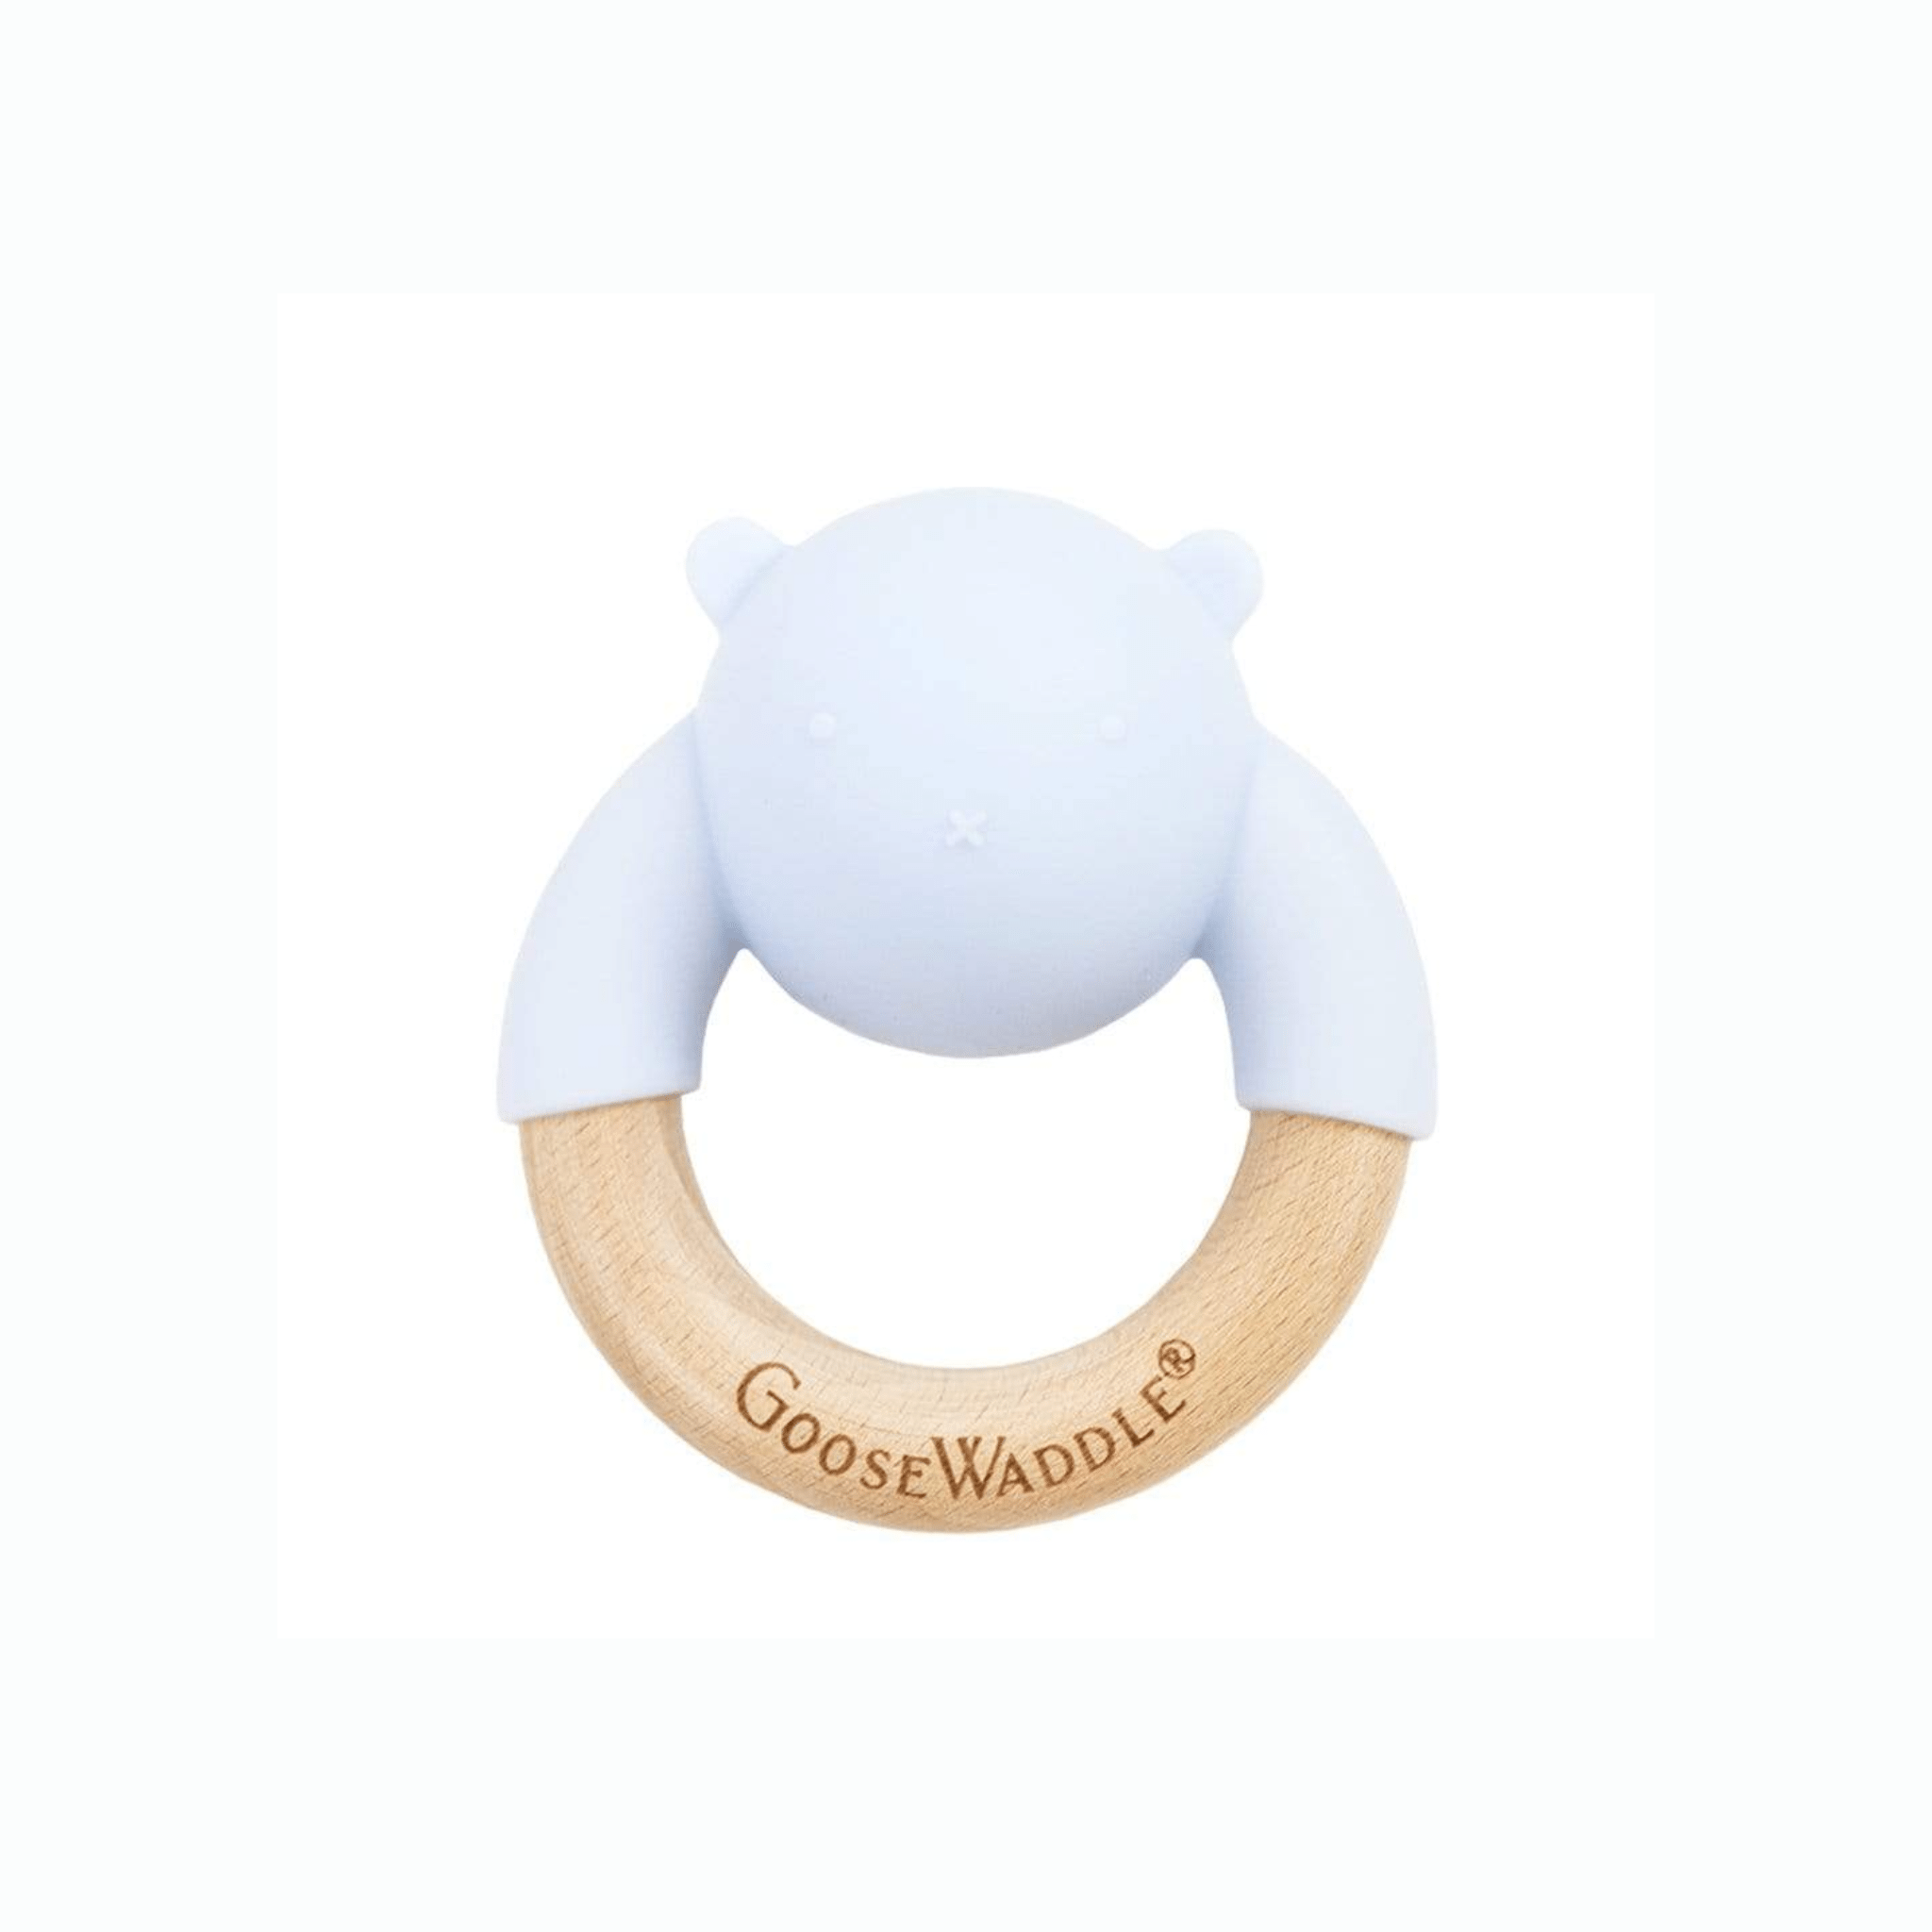 PLL - Goosewaddle + Pello Goosewaddle + Pello Silicone + Wood Rattle Bear - Little Miss Muffin Children & Home